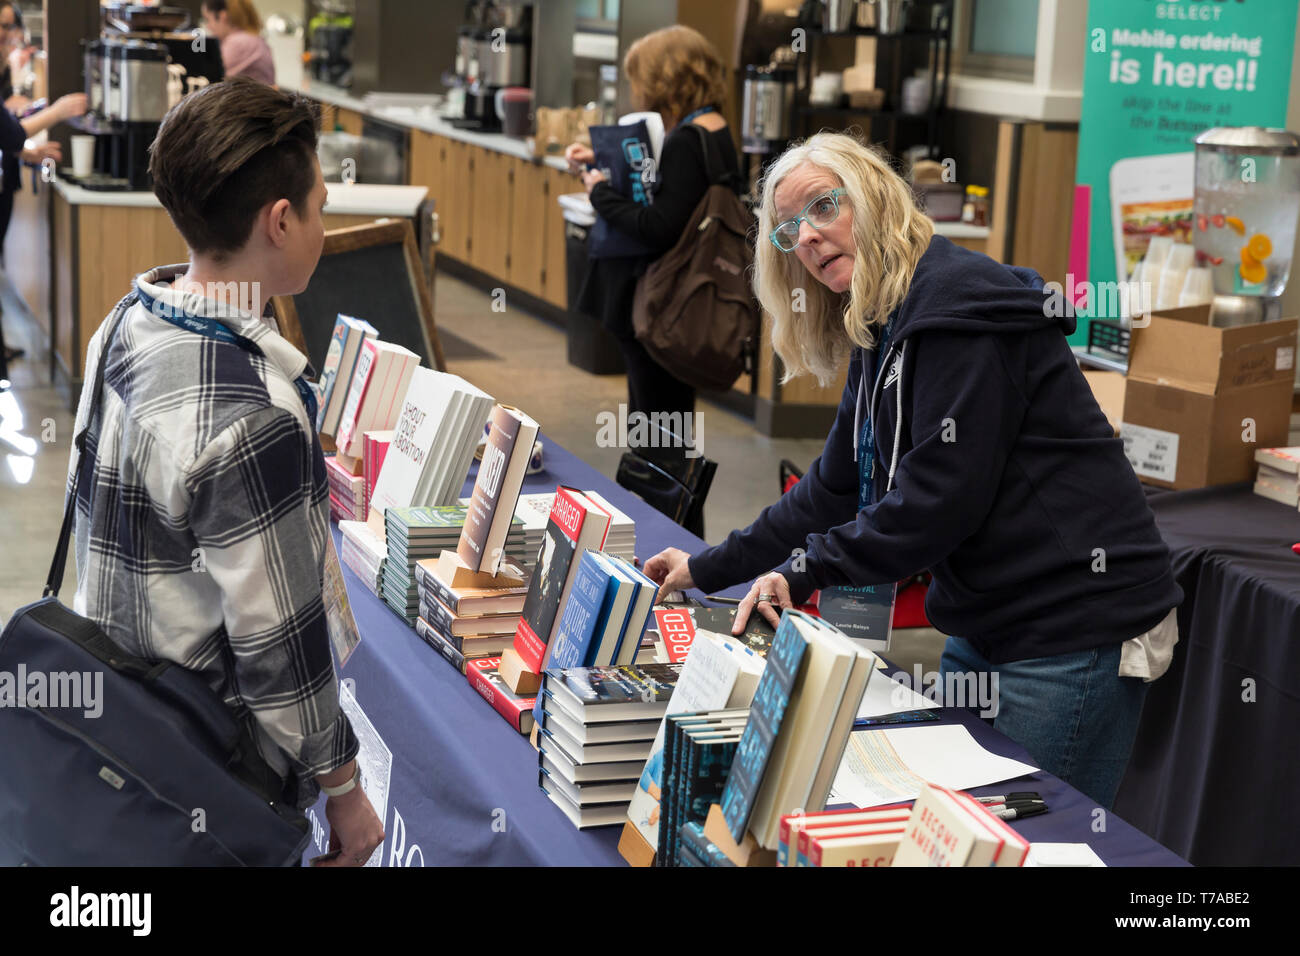 Seattle, Washington: Laurie Raisys, proprietar of Island Books, helps a customer at her pop-up bookshop at the Crosscut Festival. Seattle University h Stock Photo